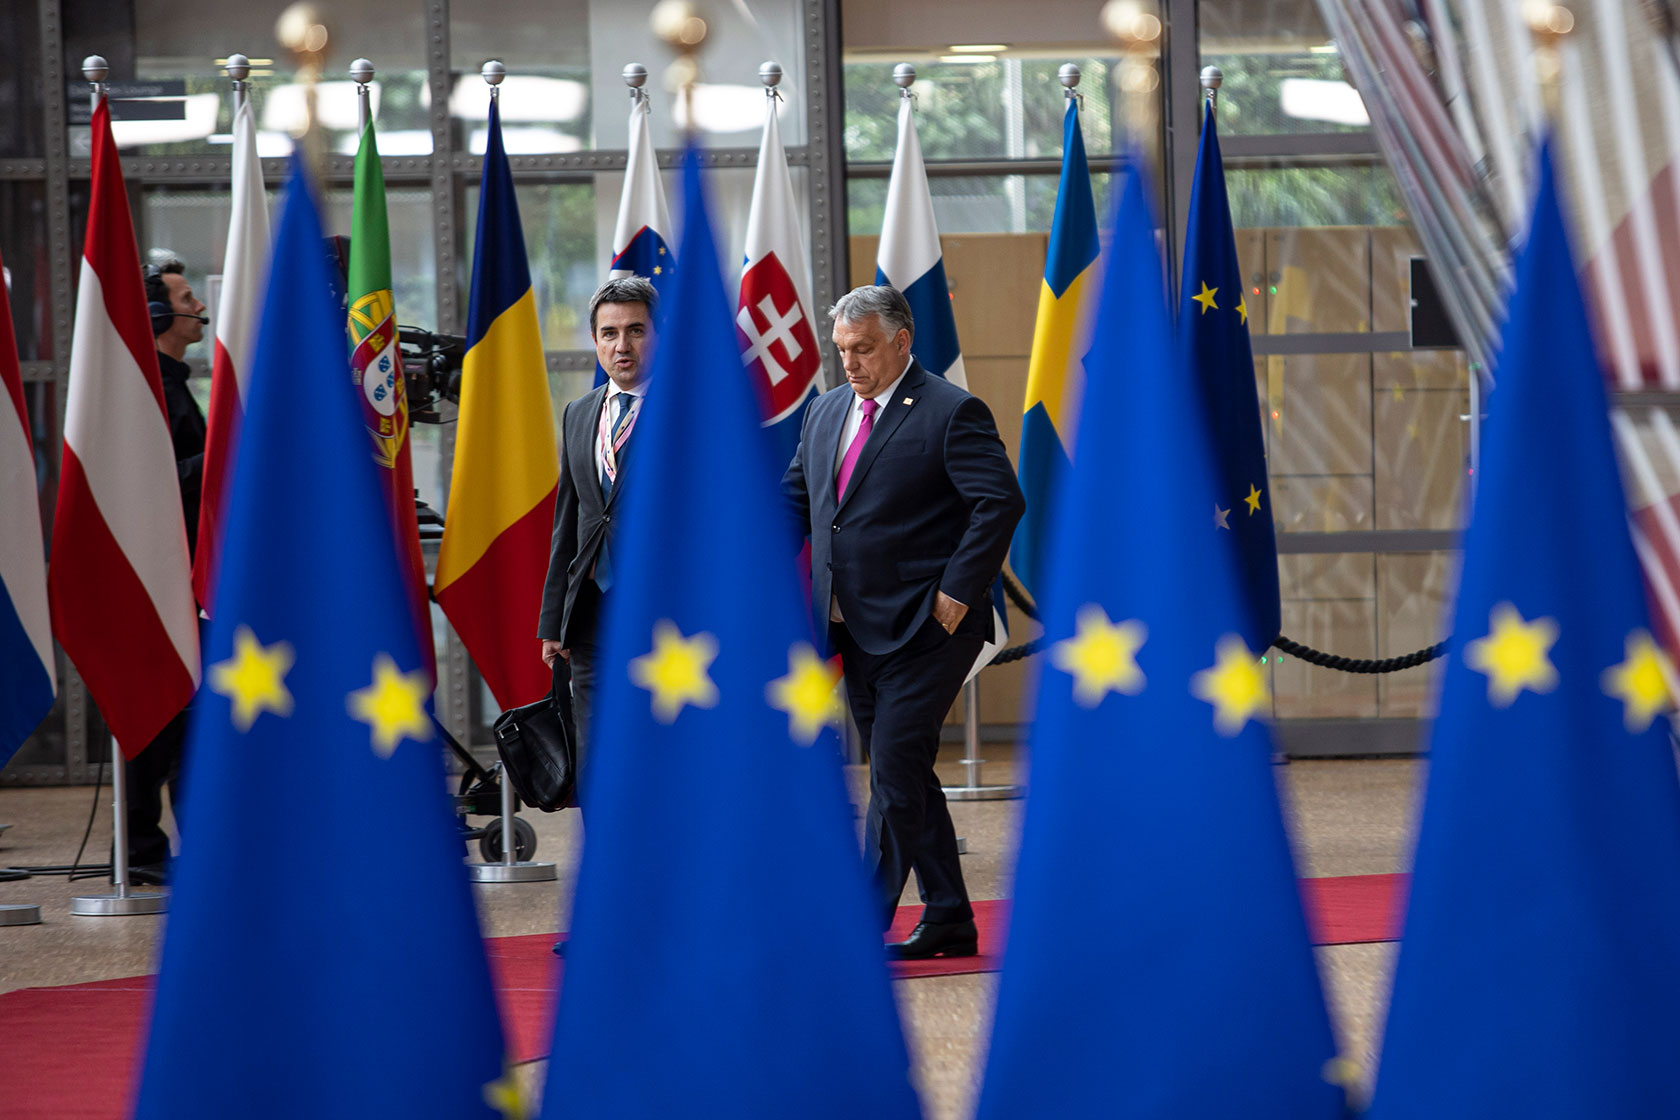 Hungarian Prime Minister Viktor Orbán arrives at the special EU summit in Brussels.